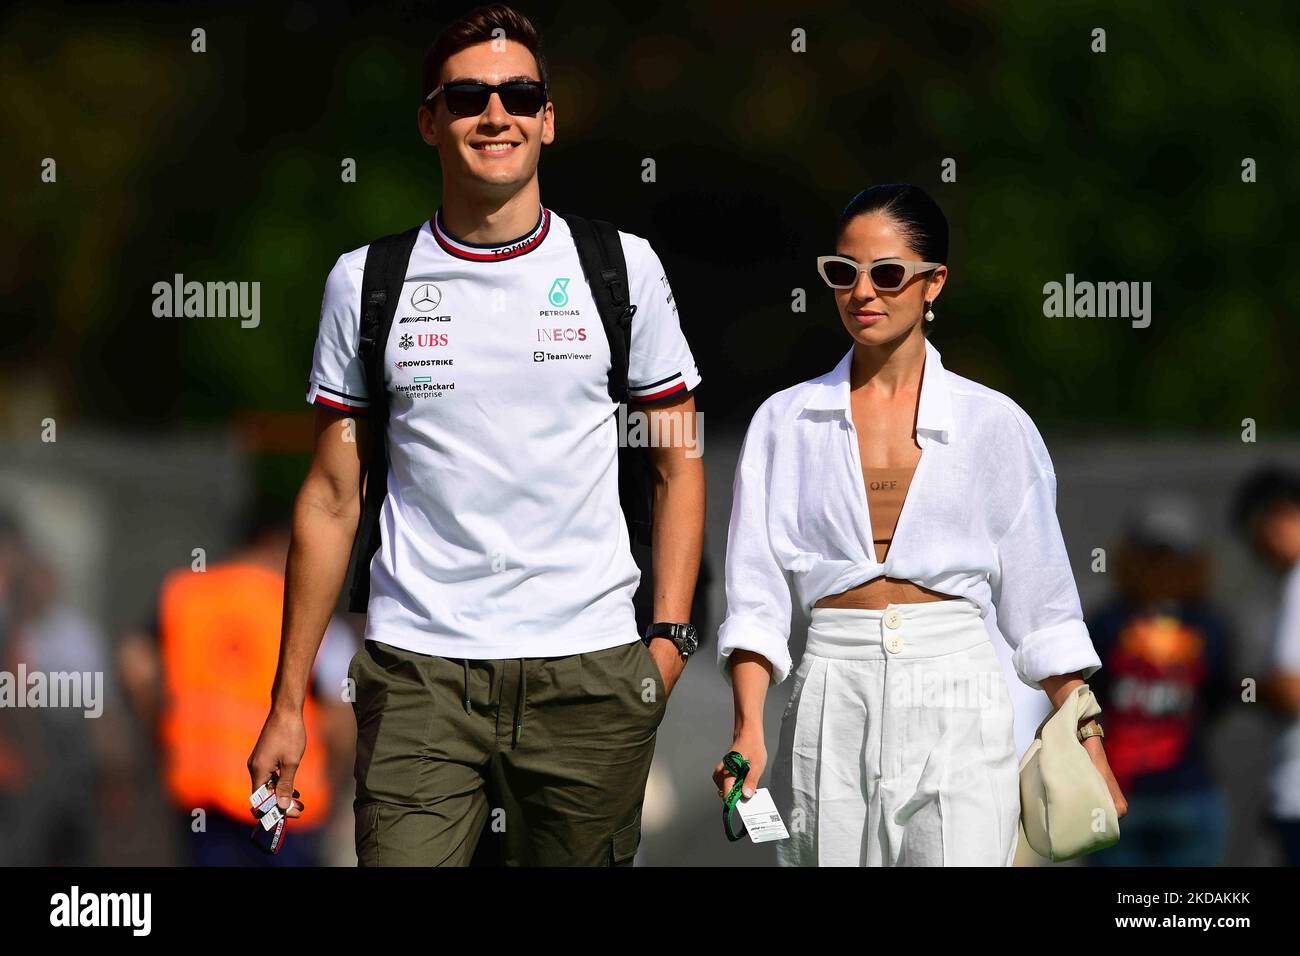 George Russel of Mercedes-AMG Petronas arrive into the circuit before race of Spanish Grand Prix in Circuit de Catalunia in Montmelo, Barcelona, Catalunia, Spain, 22 May 2022 (Photo by Andrea Diodato/NurPhoto) Stock Photo